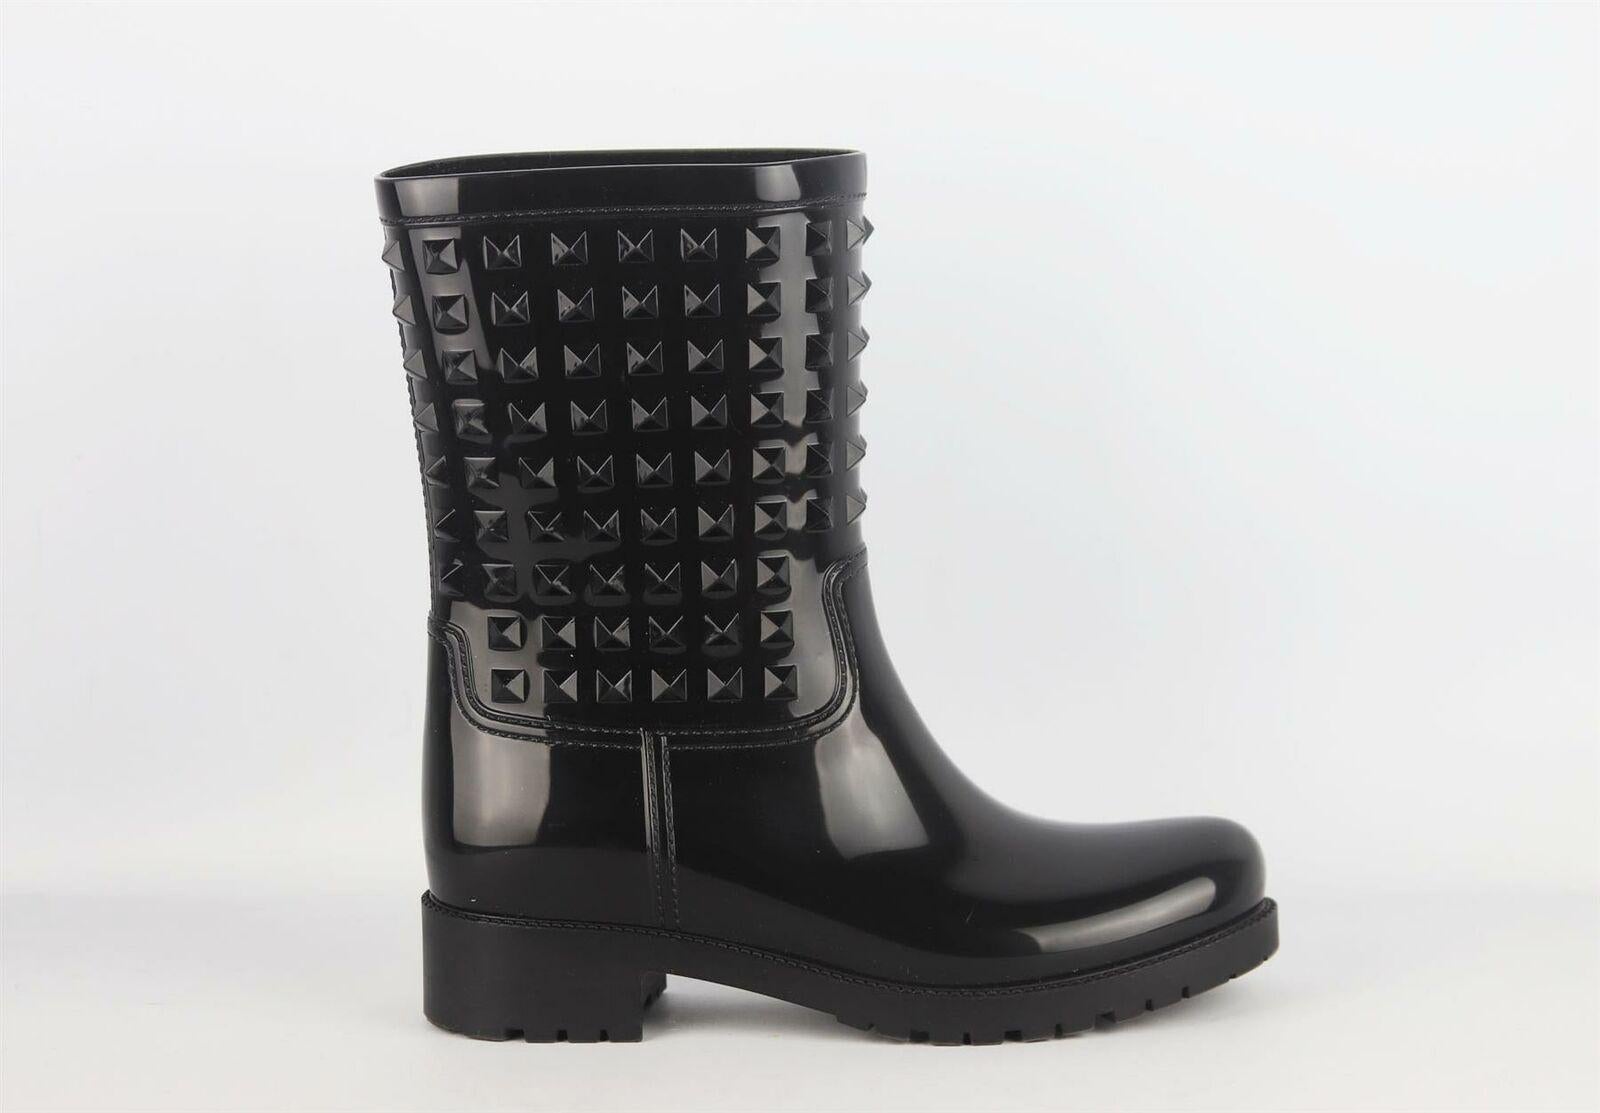 Valentino's signature Rockstud embellishments capture the essence of the Italian powerhouse: sophisticated and elegant with a tough-luxe edge, these black rubber boots have a round toe, a ridged rubber sole and plastic rockstud embellishments.
Heel